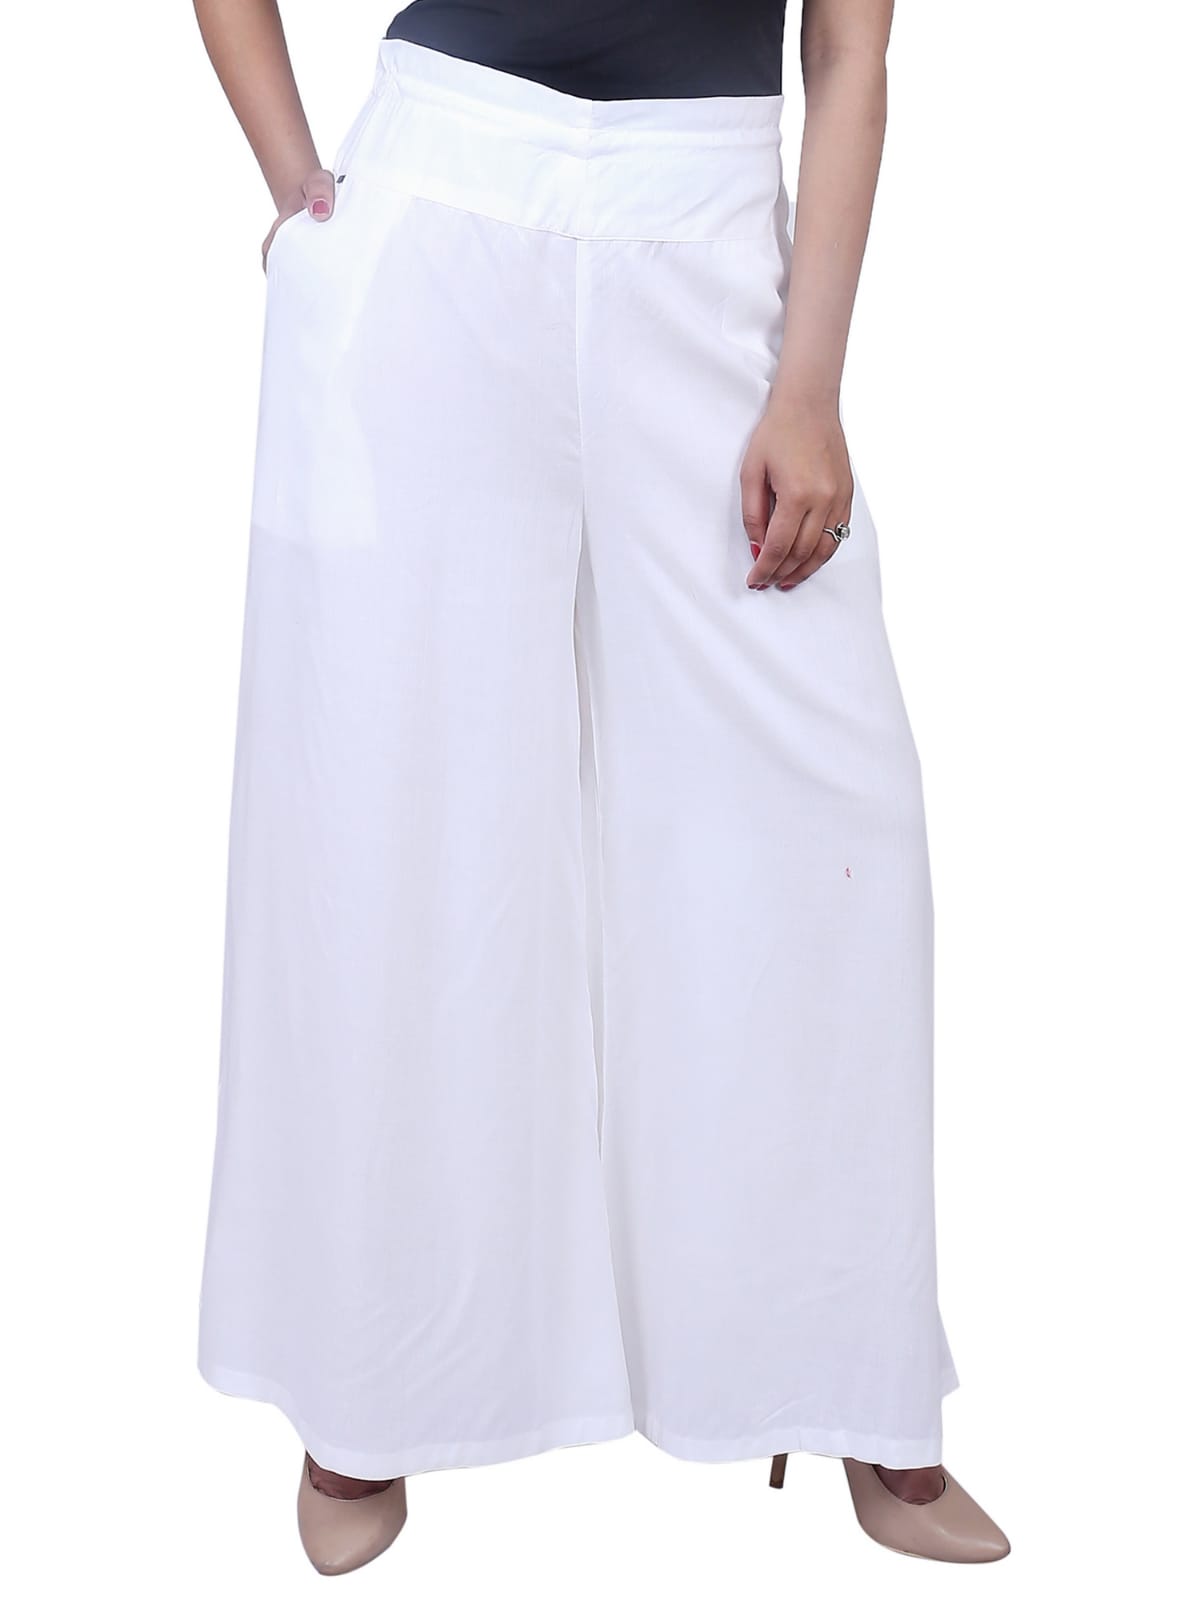 Women's Solid Color Rayon Stylish Palazzo Bottom wear (White)